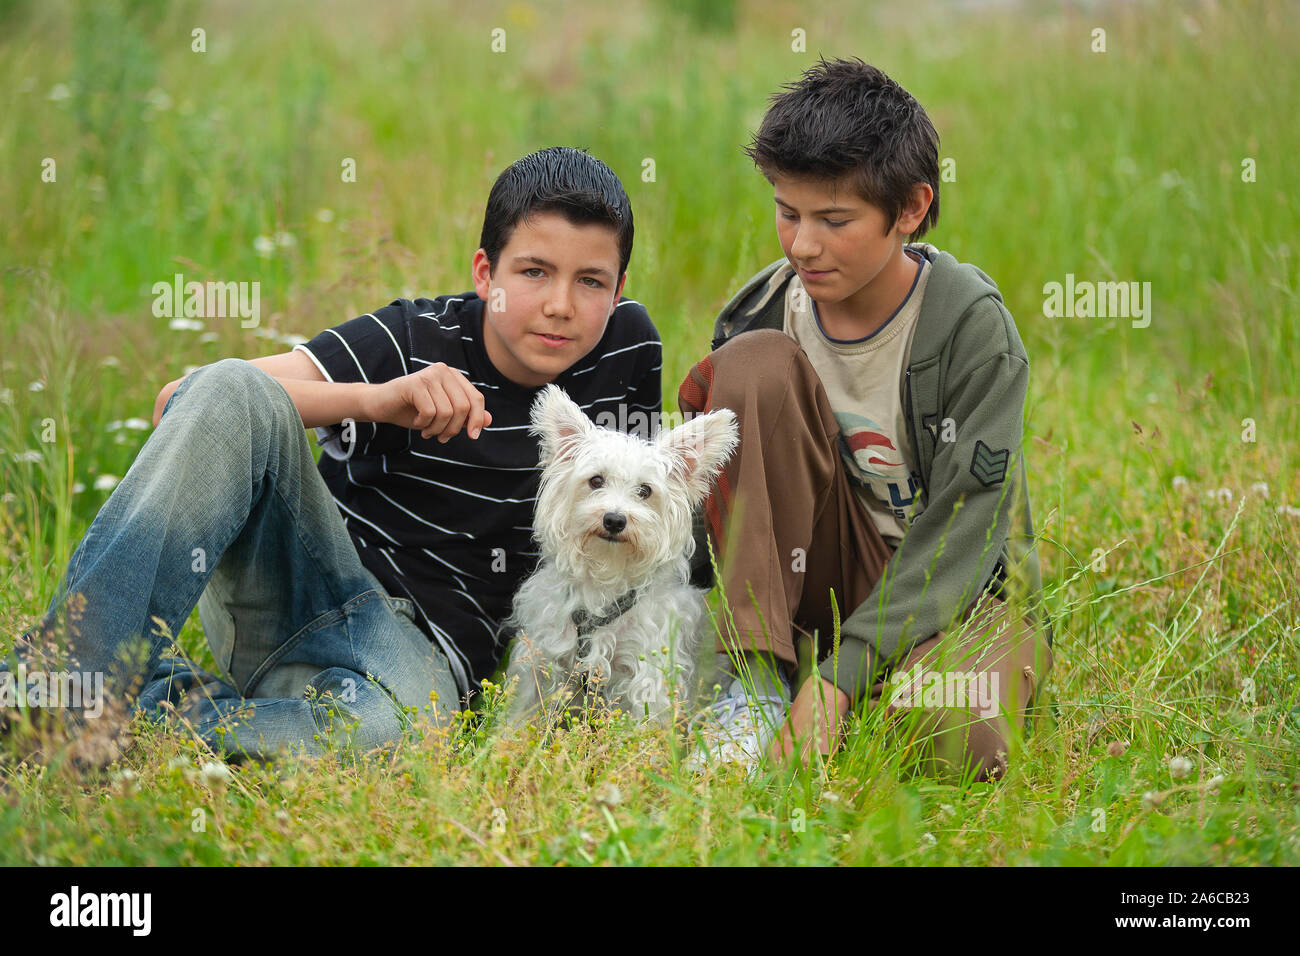 Two young boys sitting in a meadow with their dog. Stock Photo